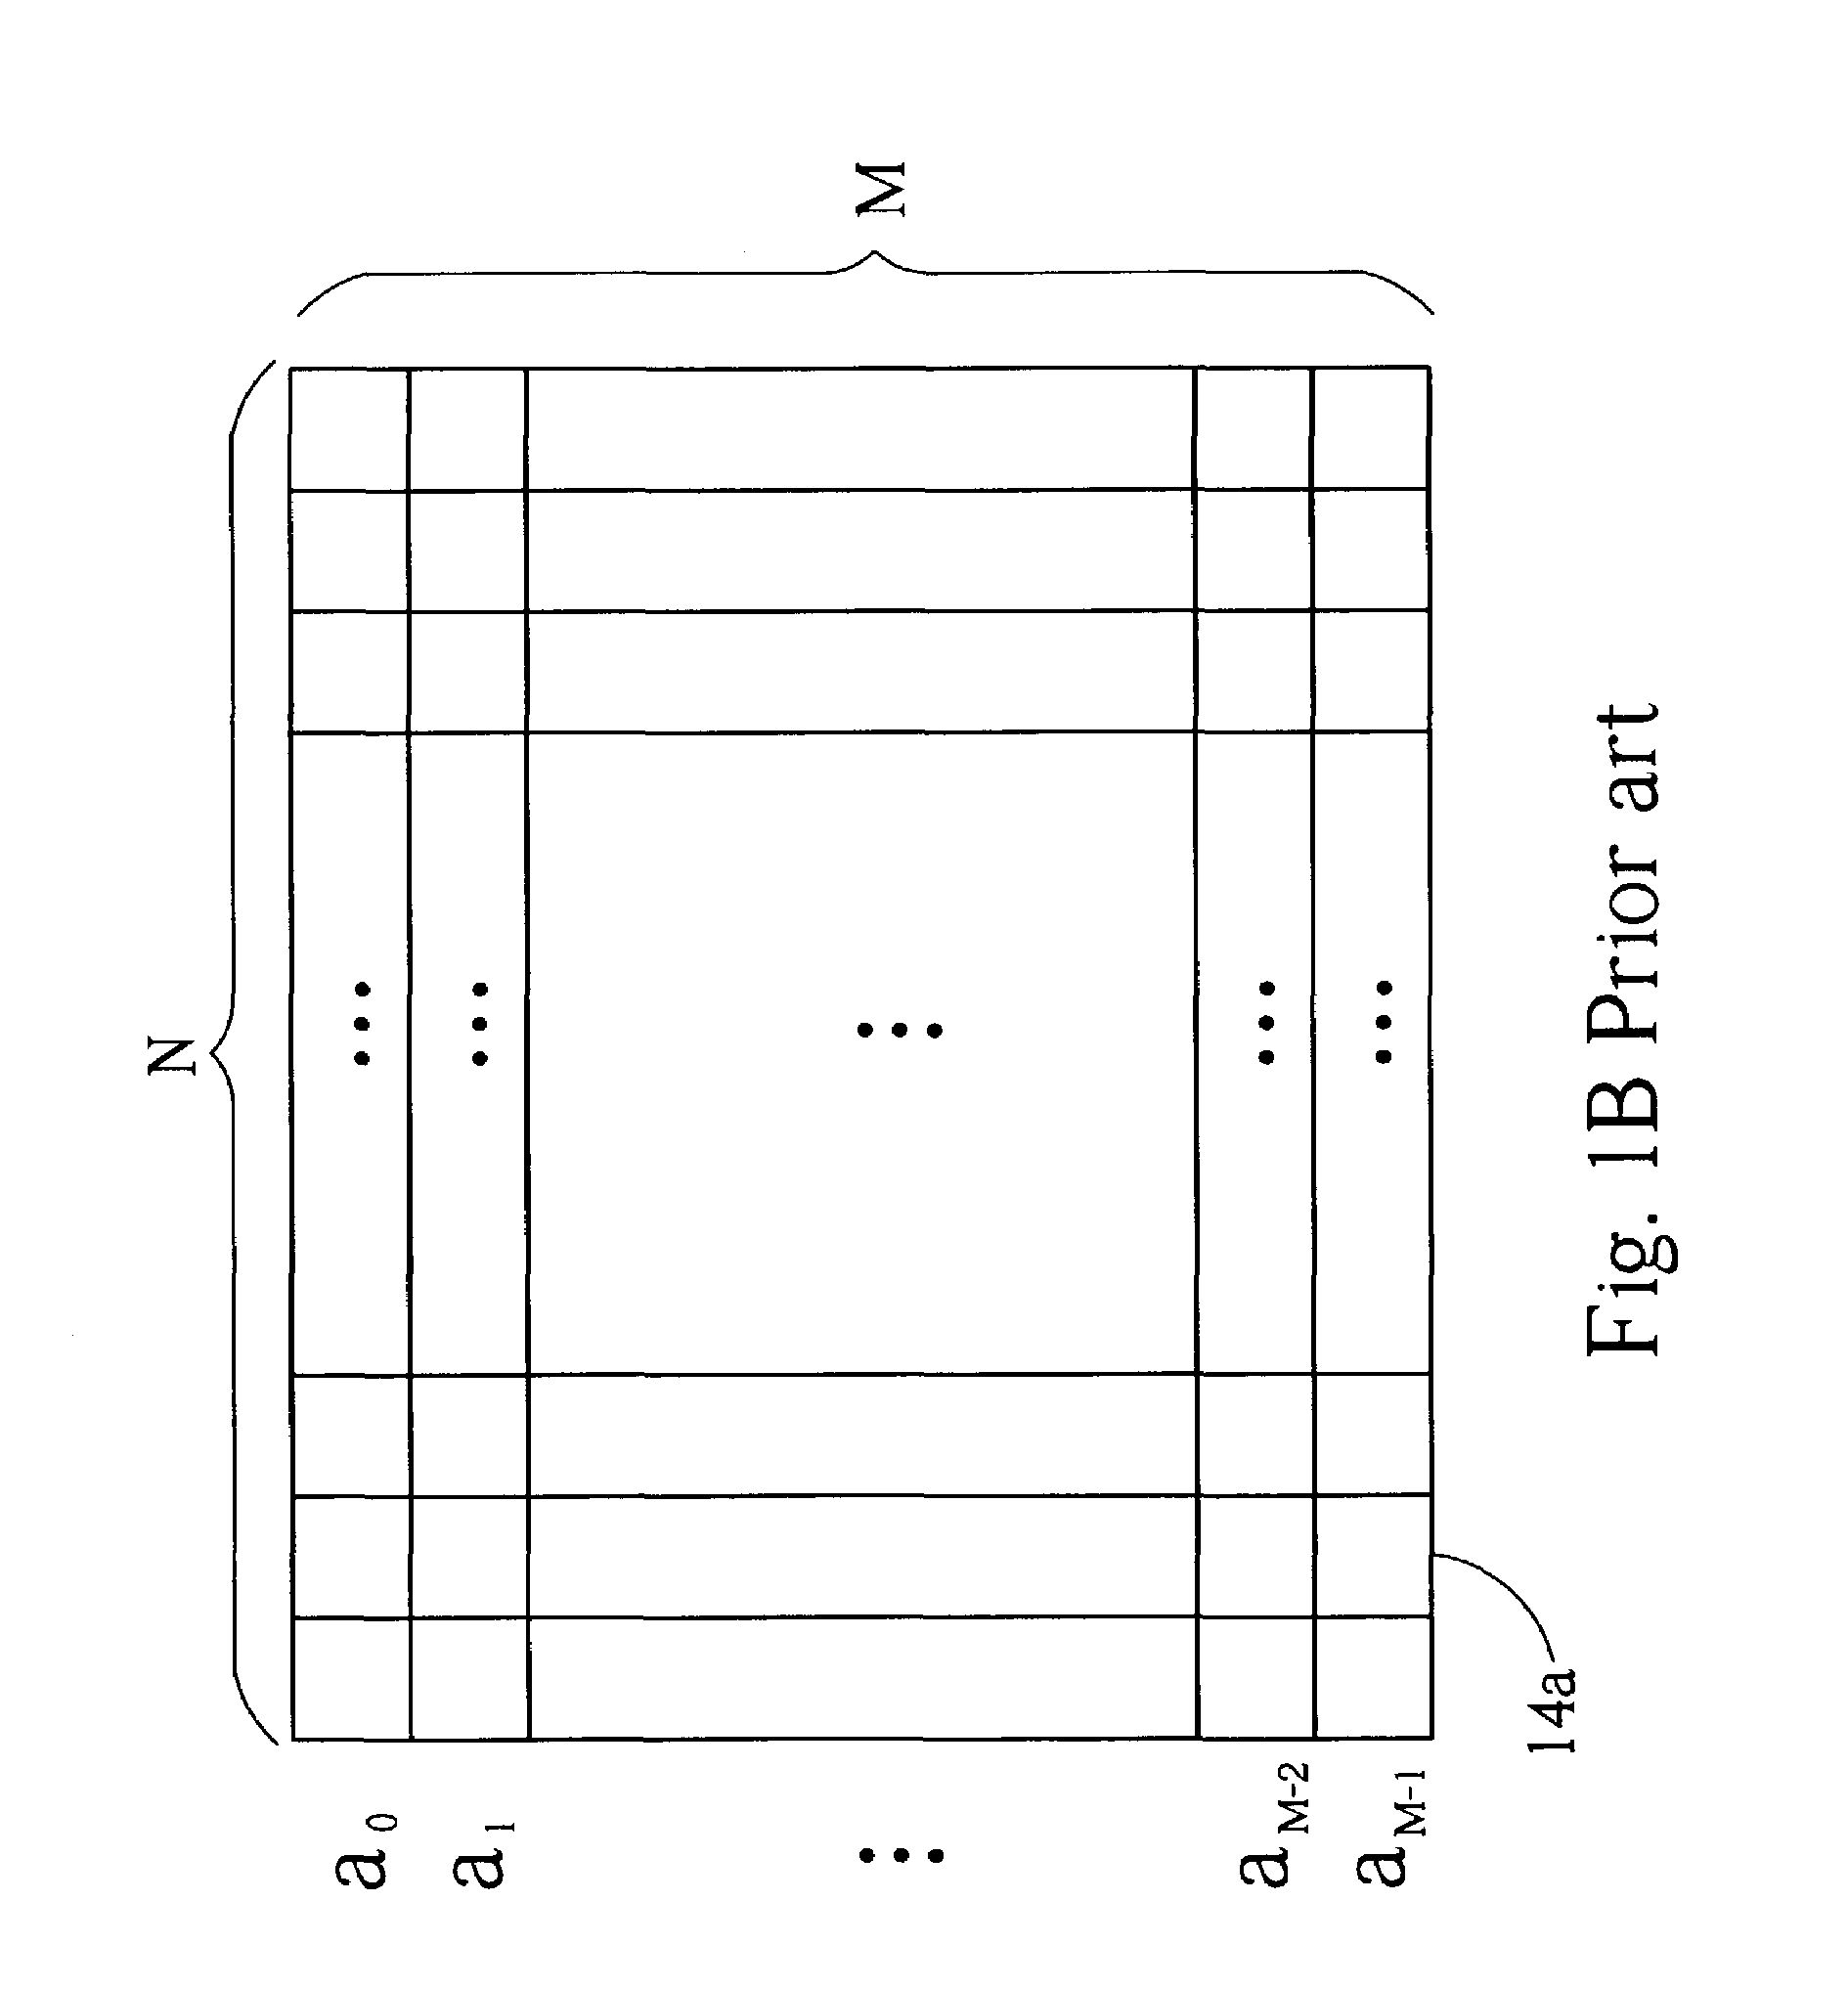 Method for generating 2D OVSF codes in multicarrier DS-CDMA systems